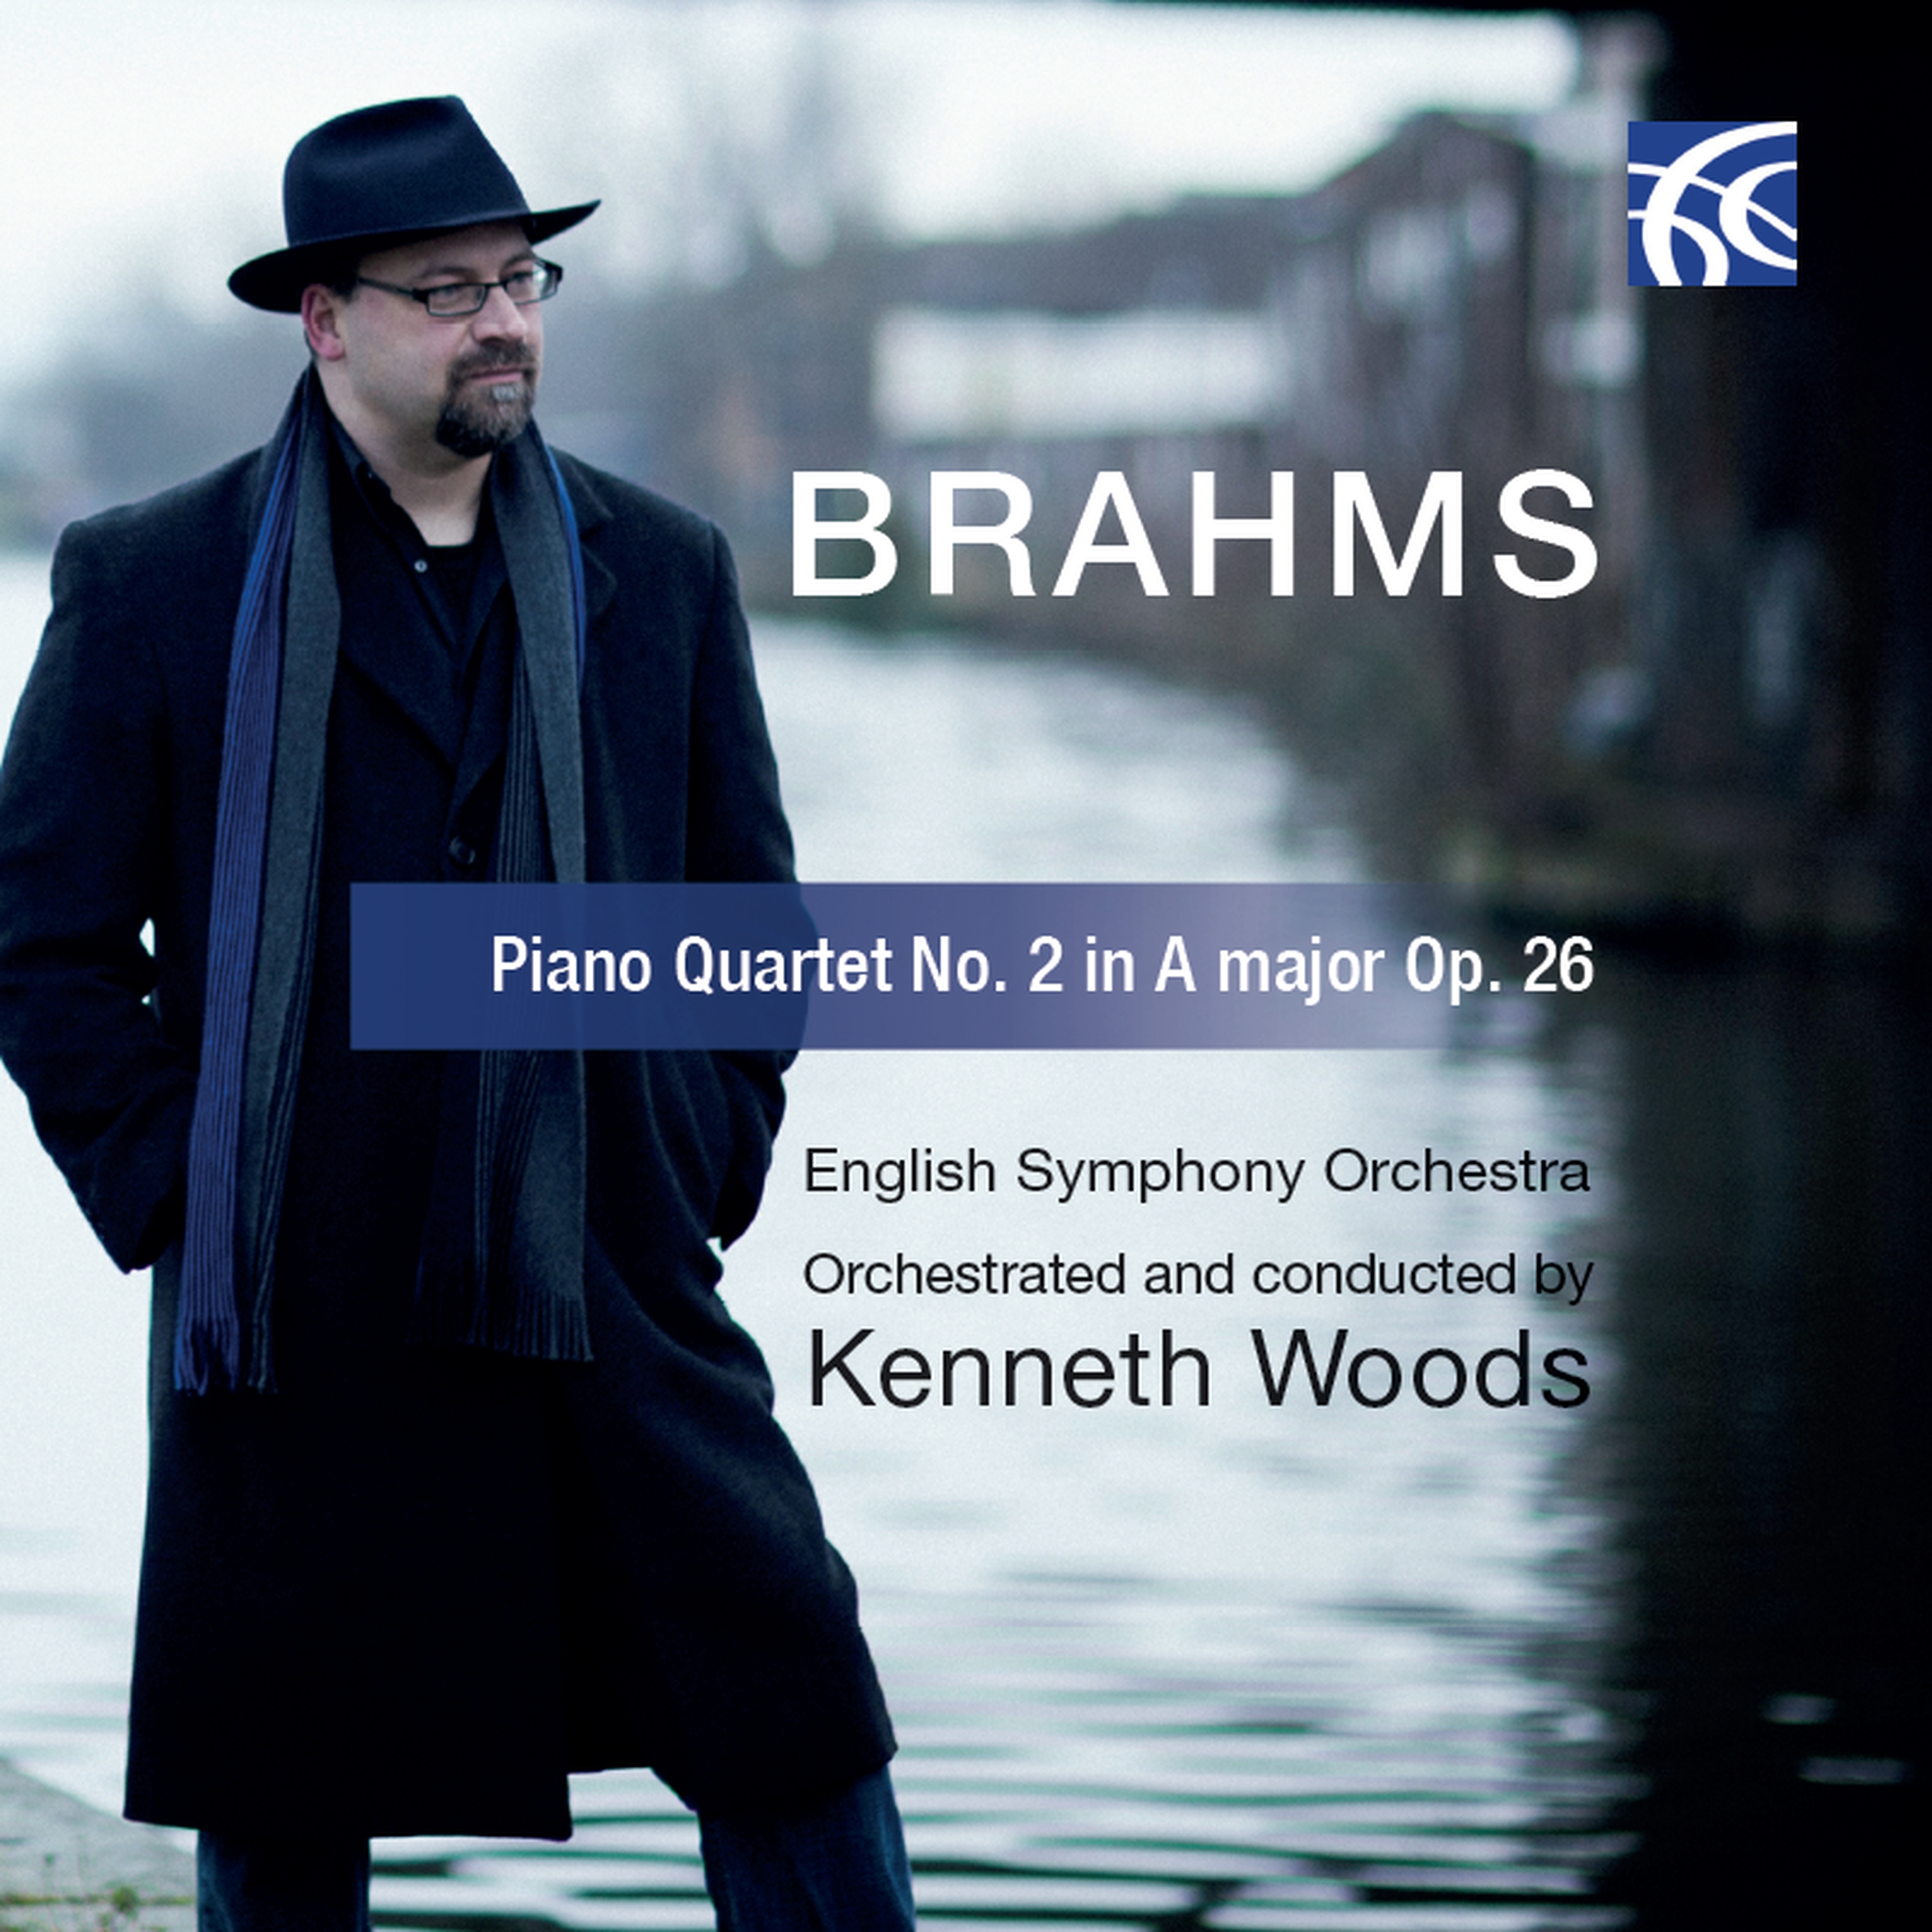 BBC Music Magazine on Ken’s Orchestration of Brahms’s Piano Quartet in A Major